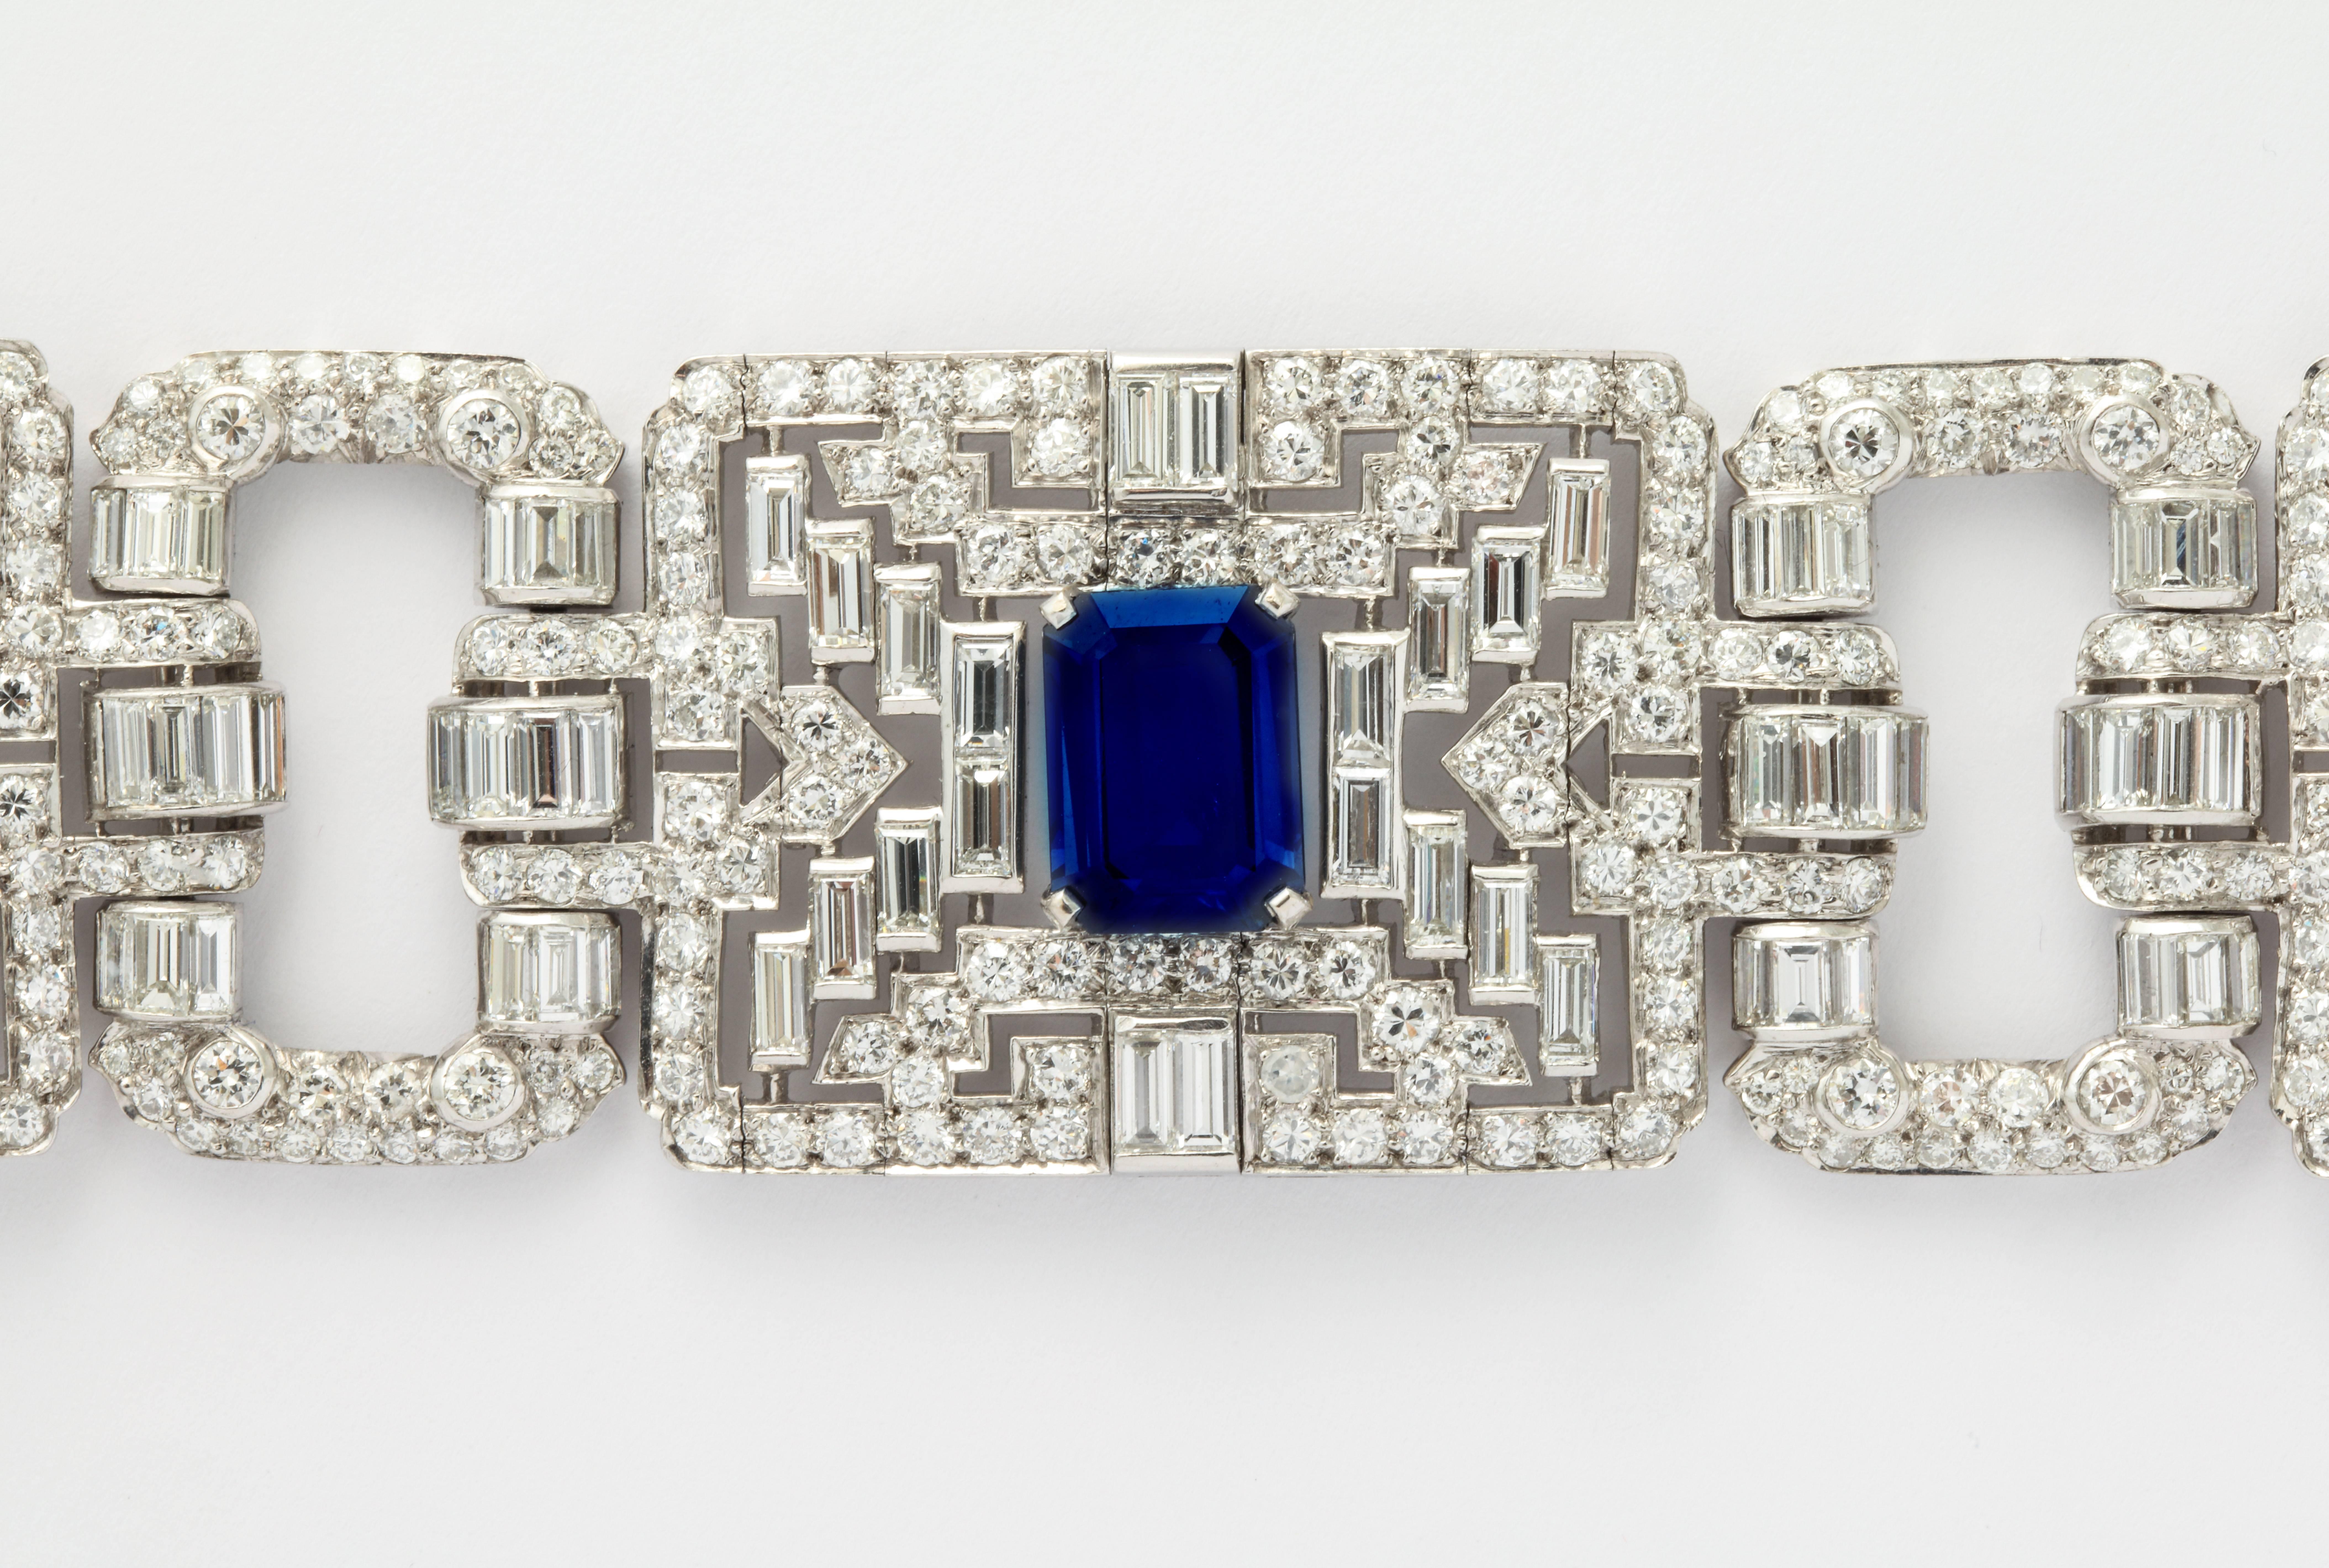 A very impressive Wide Art Deco Diamond and Sapphire Bracelet

The largest sapphire weighs approx 6.01 ct
The other two sapphires weigh approx 7.57 ct
Diamond weight is approx 31.48 ct

All three sapphires are GIA certified

1.22 inches